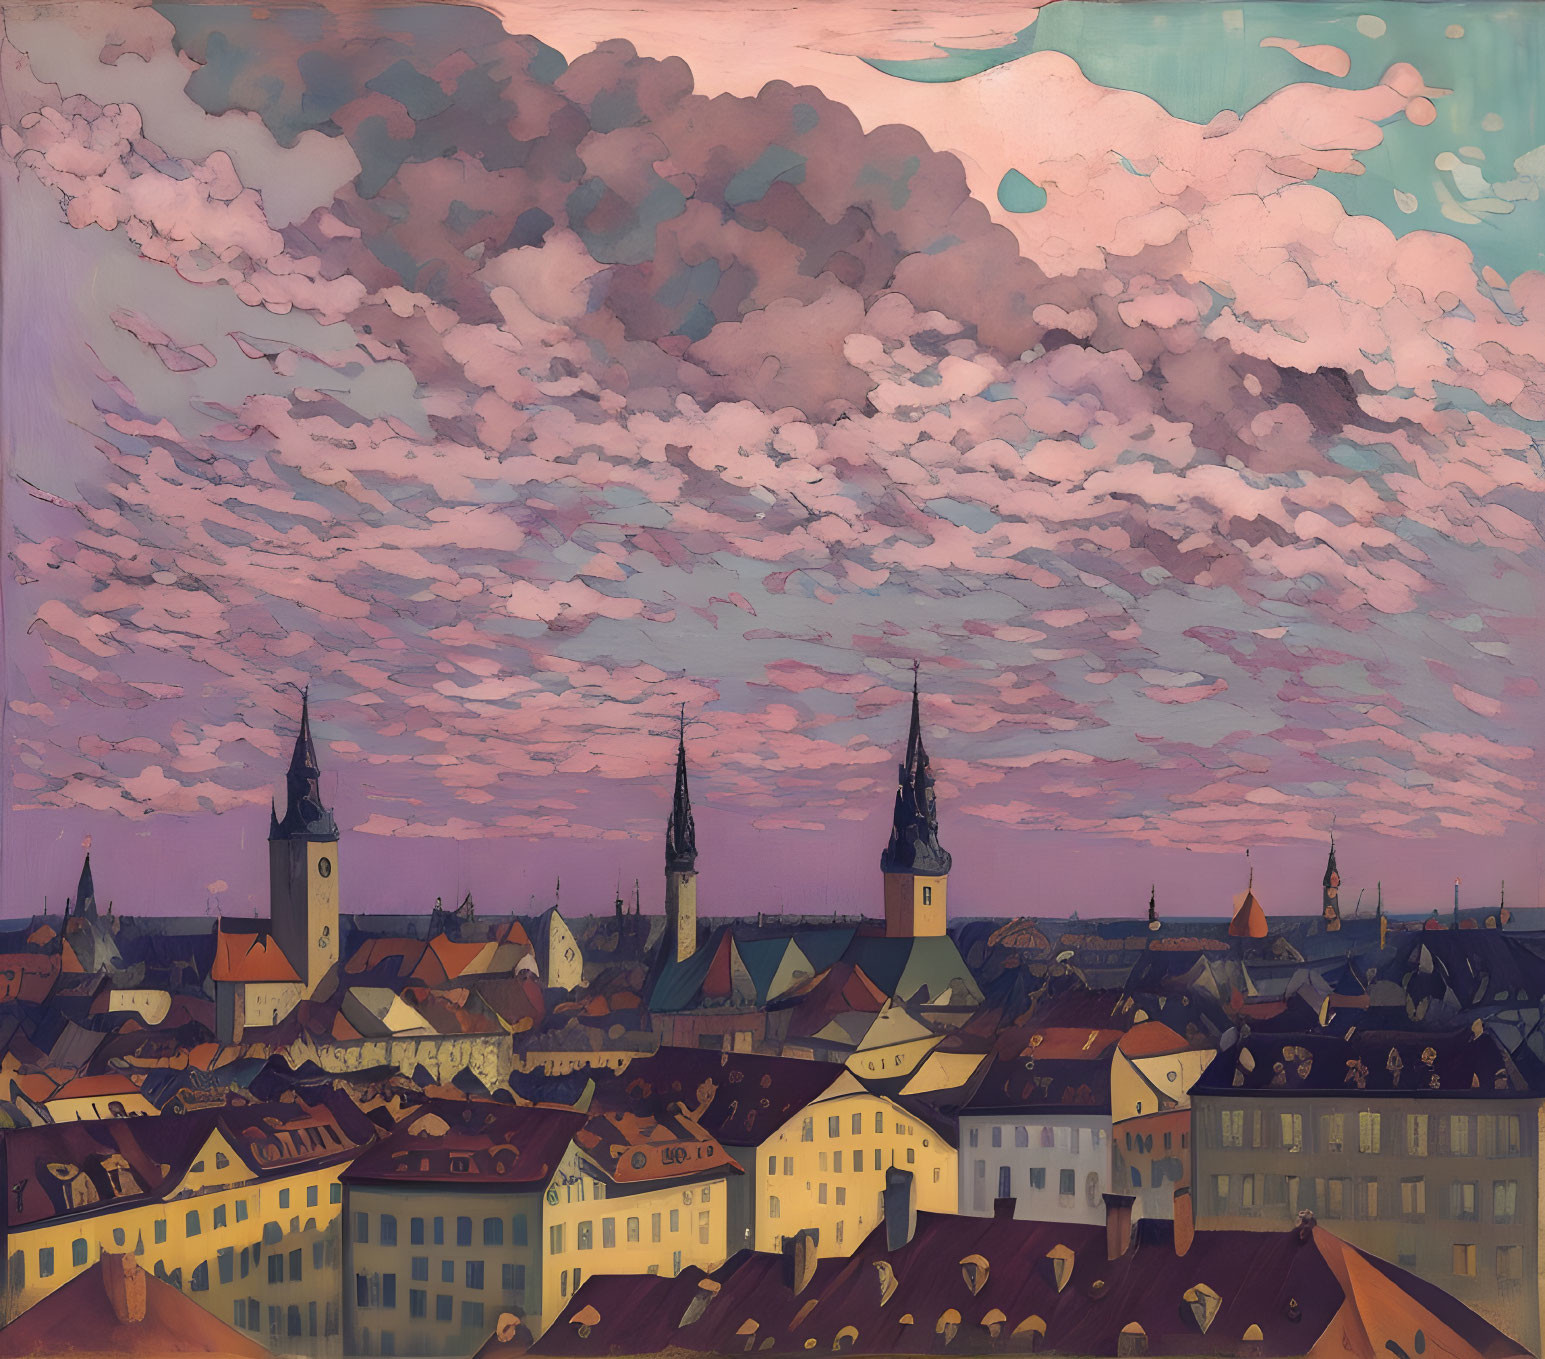 Cityscape painting at dusk with steeples under colorful sky.